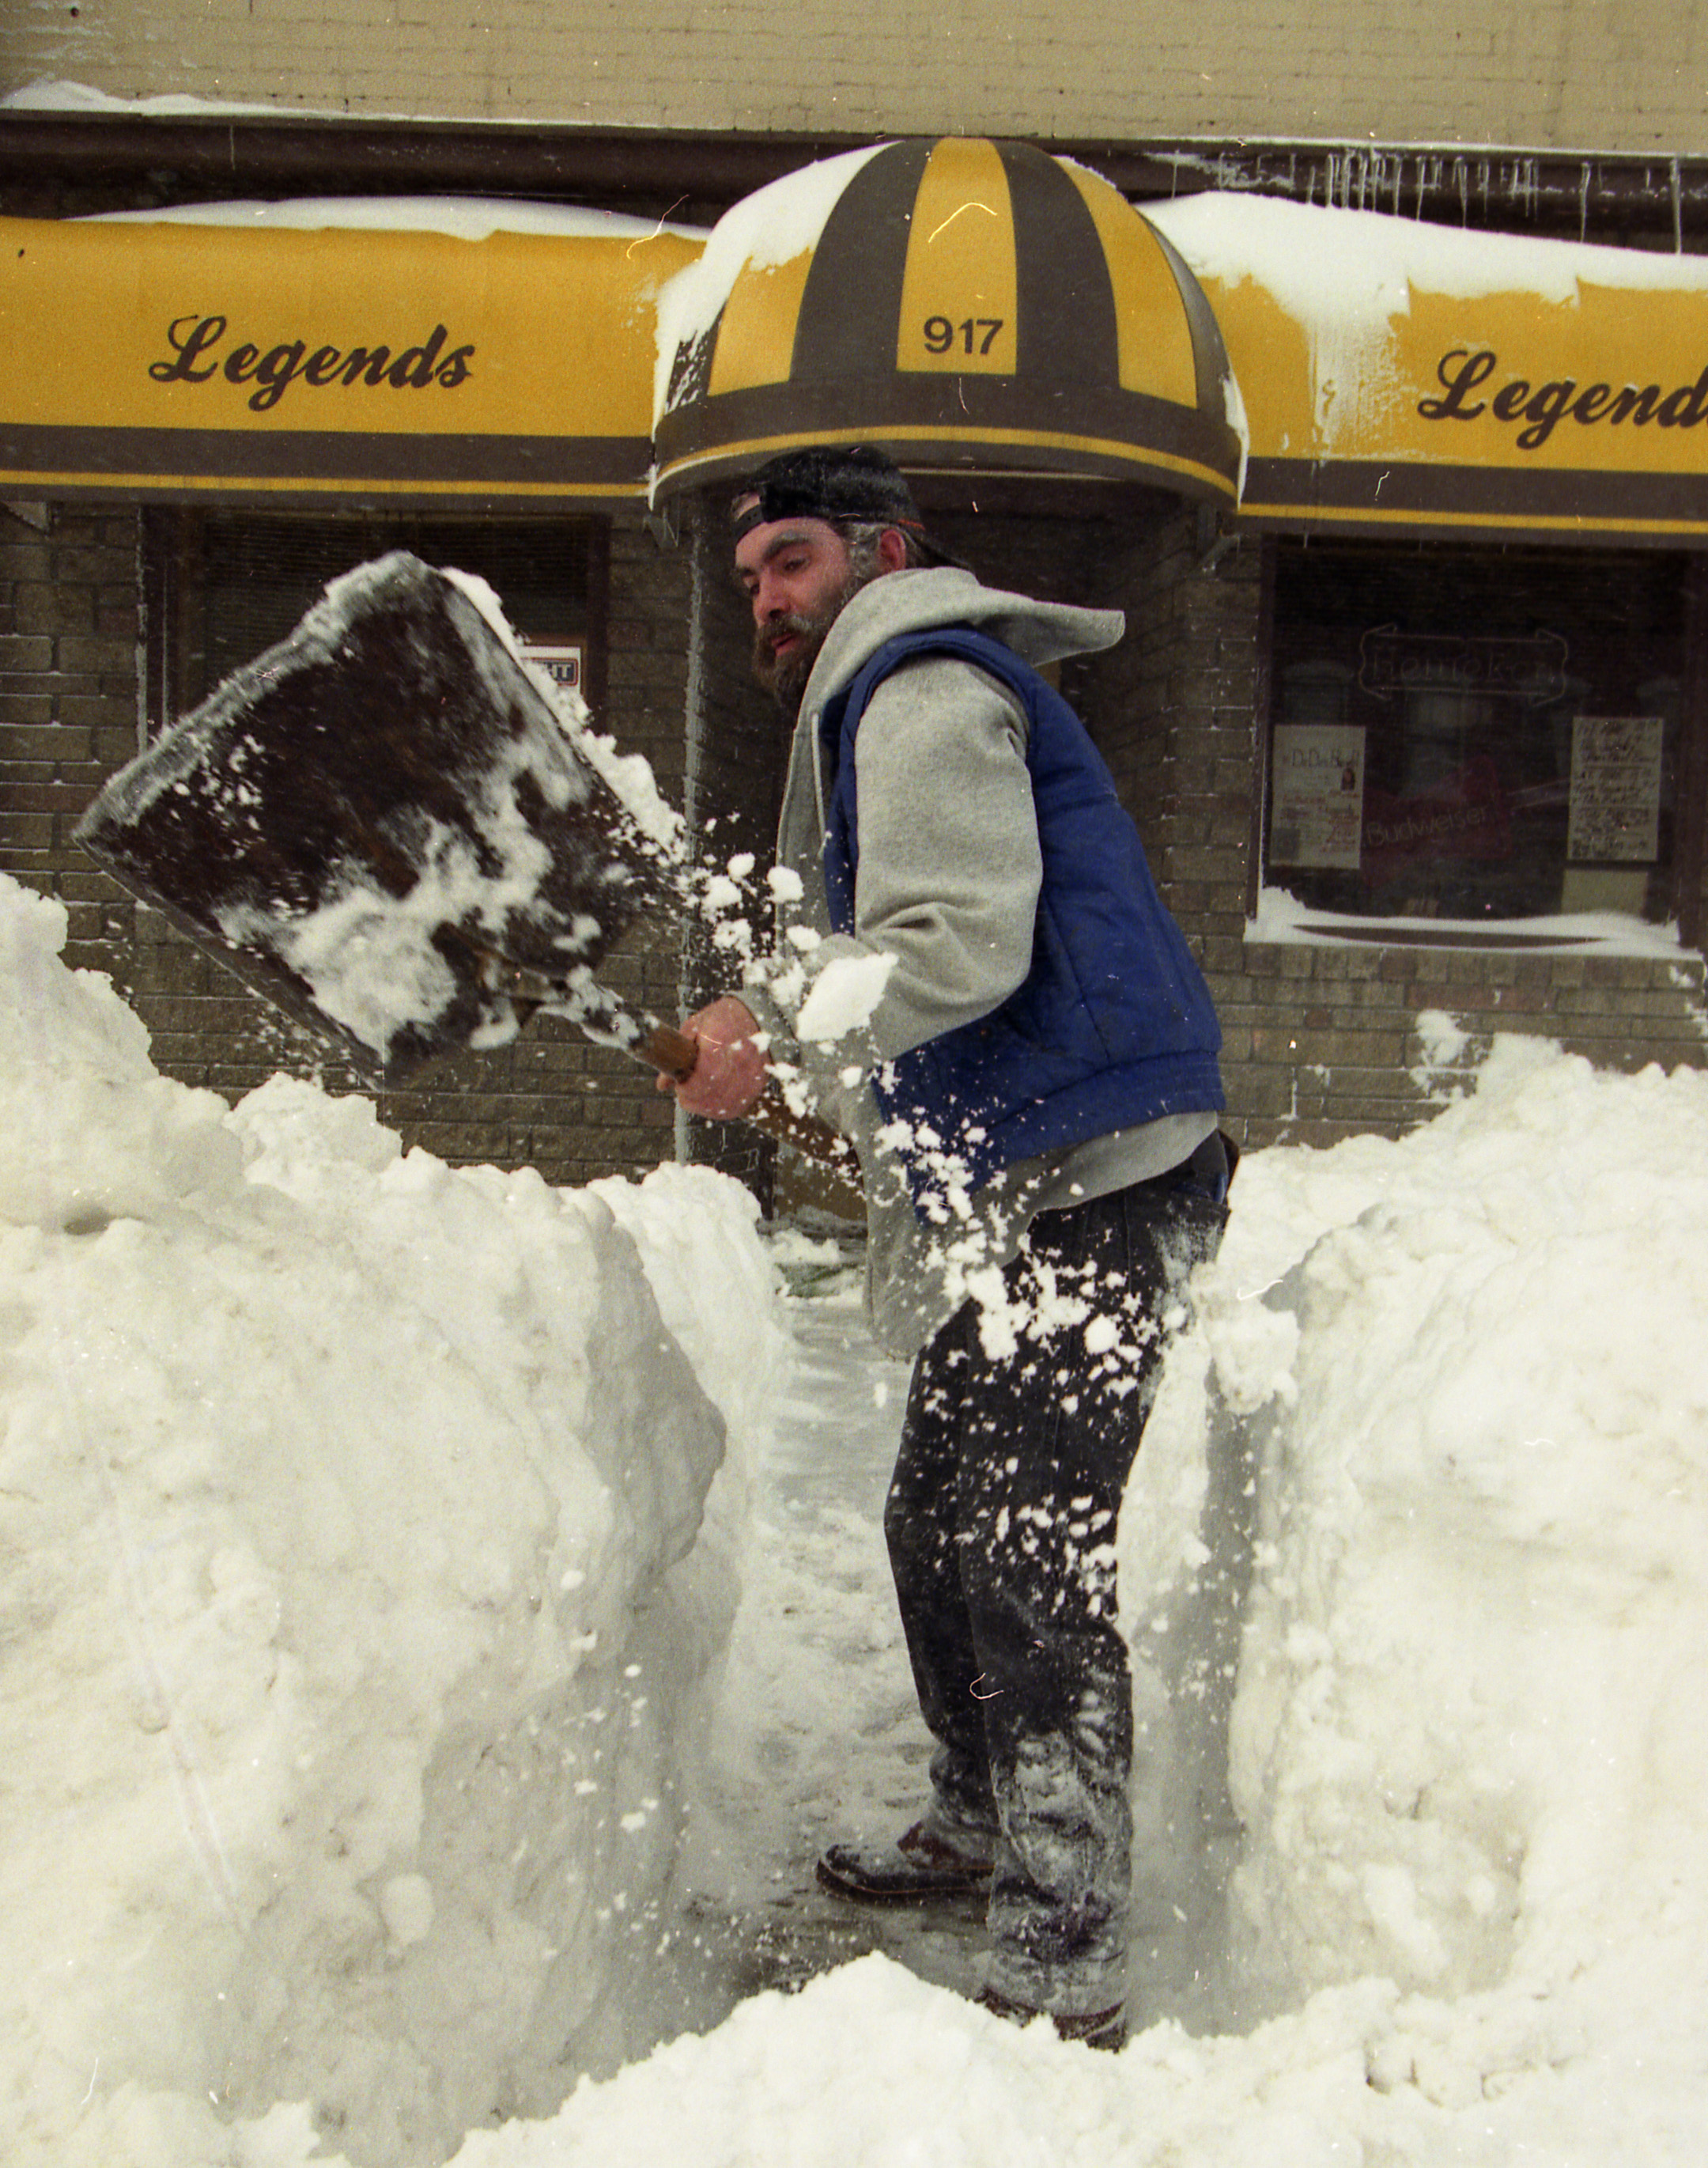 Scott McIntyre, who works at Legends Bikes 'N Blues Bar on North Salina Street in Syracuse digs out after the Blizzard of '93.